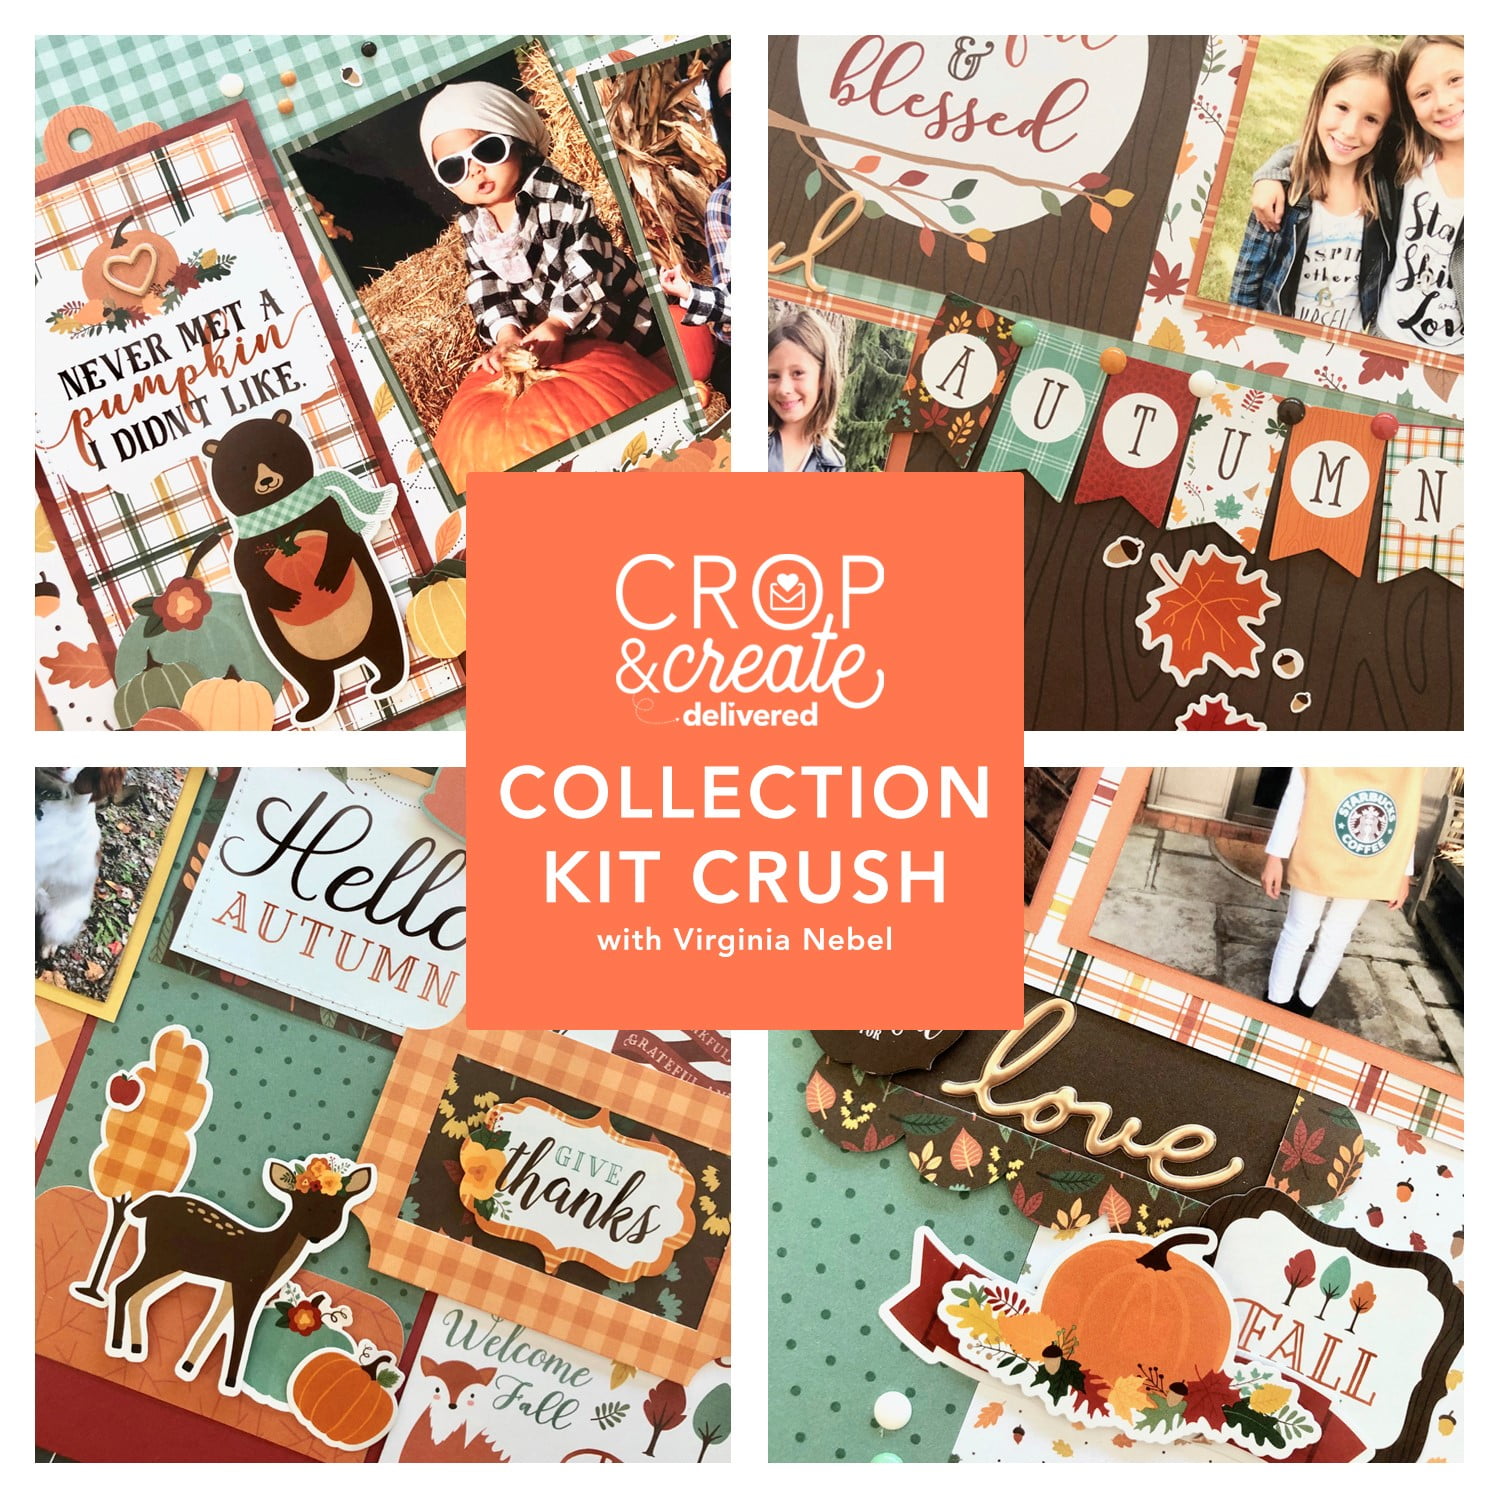 Collection Kit Crush with Virginia Nebel